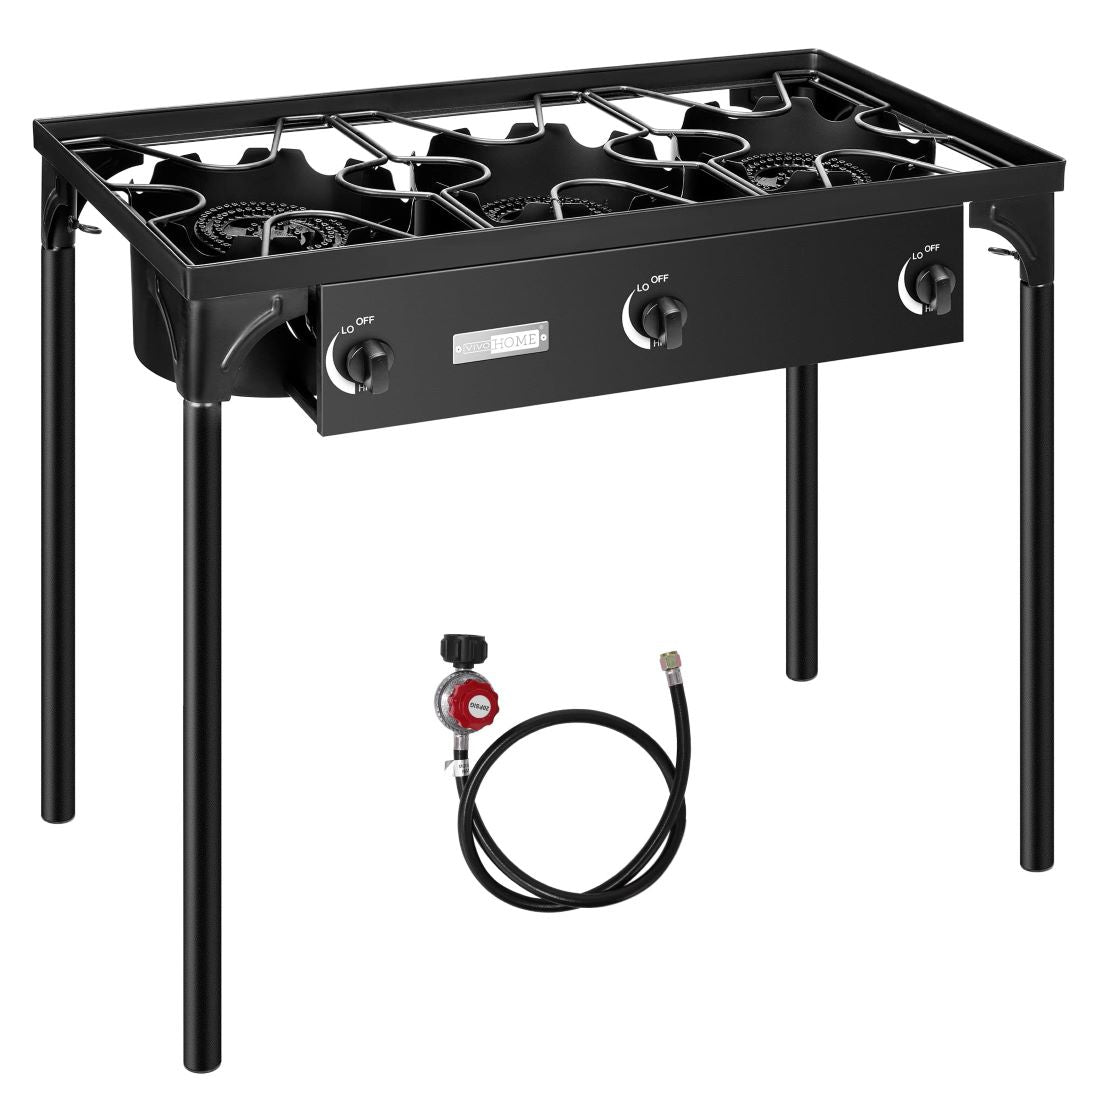 Camp Chef Outdoor Portable Dual Burner Camping Home Patio RV Oven